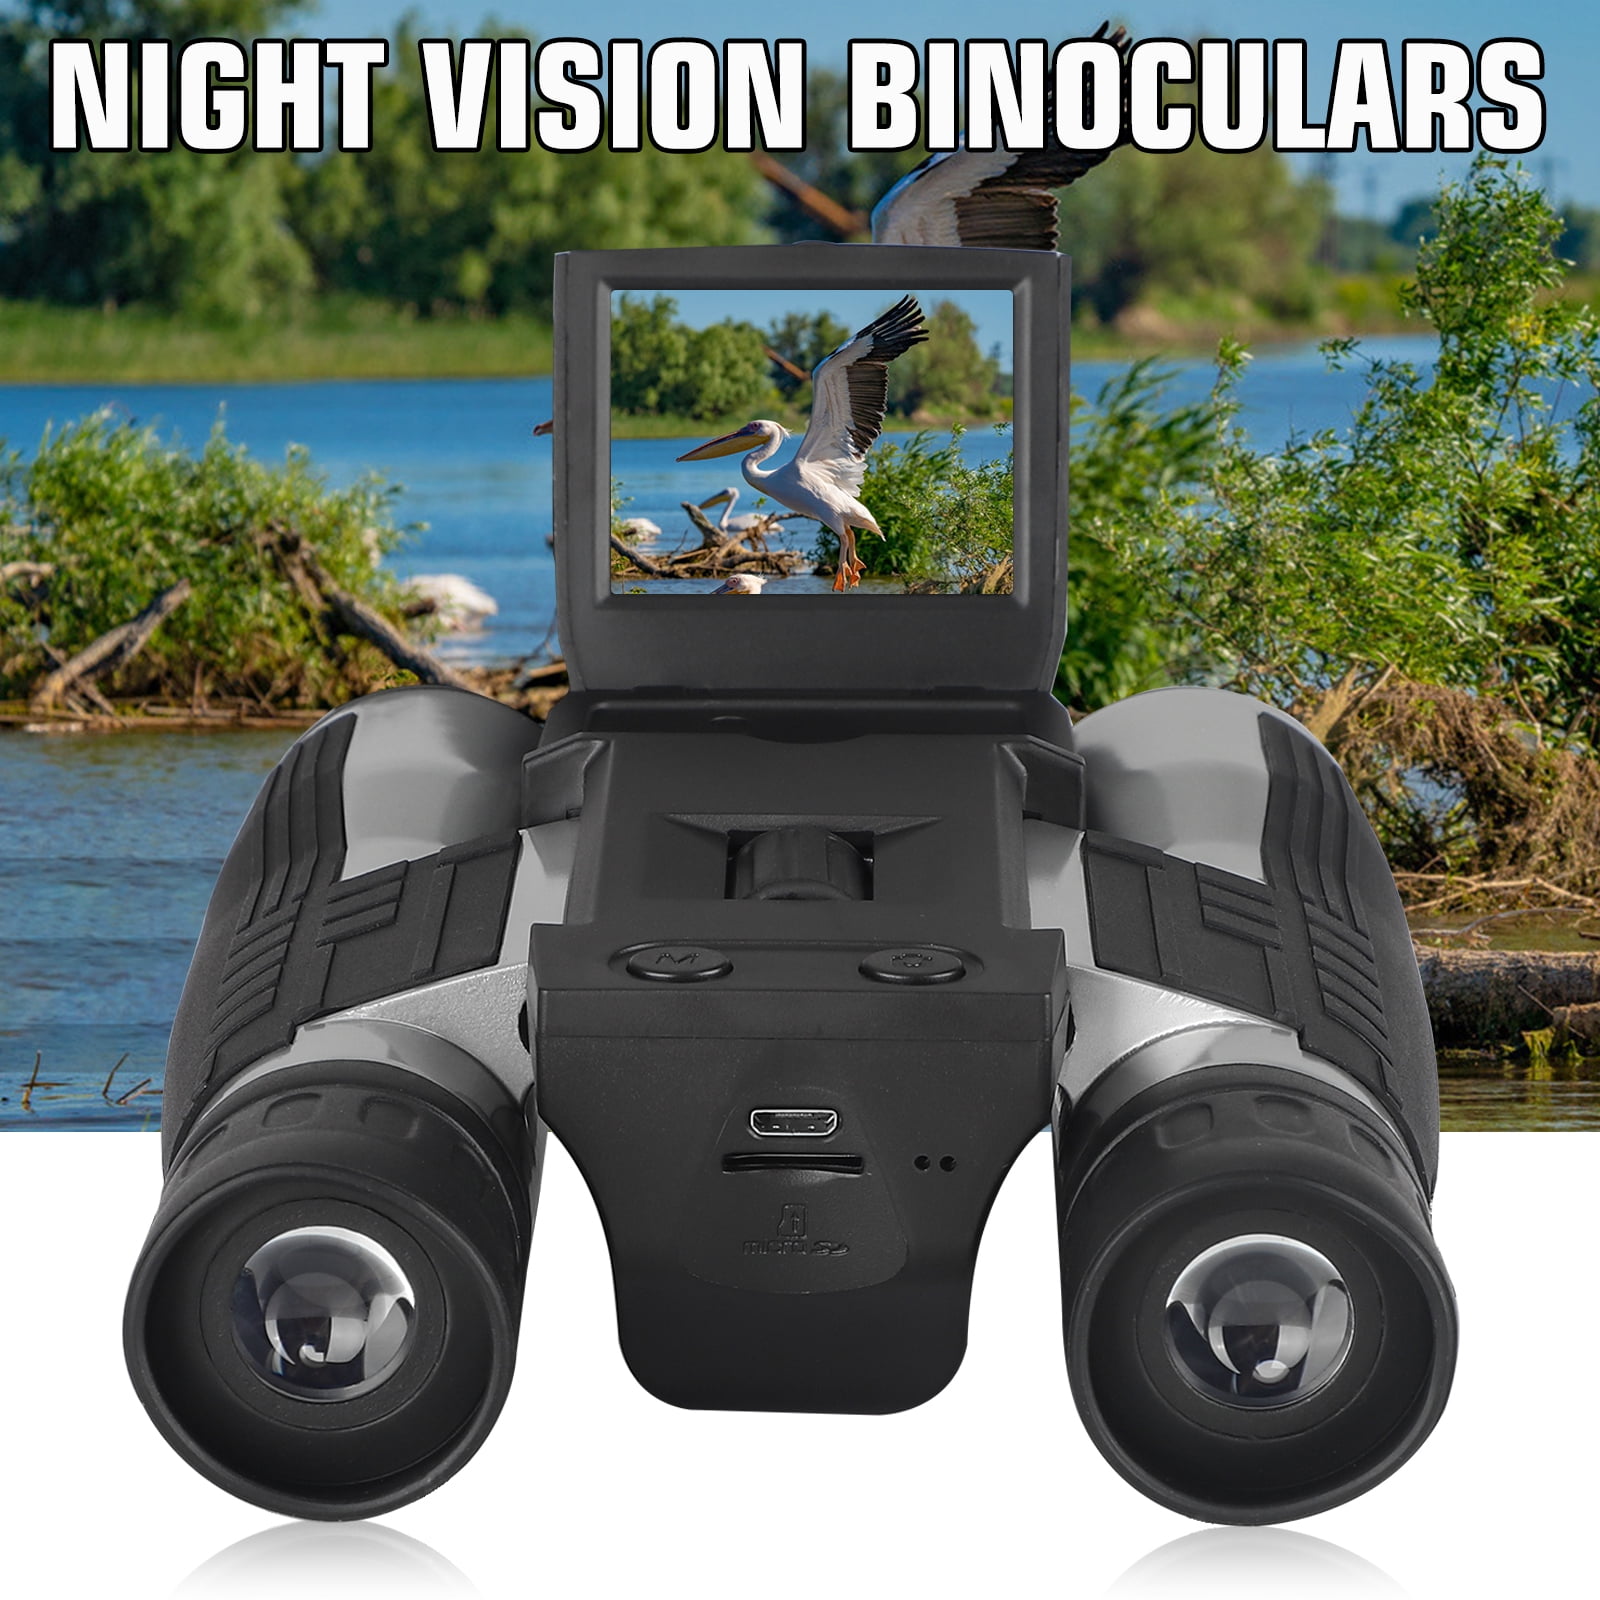 Support 32G TF Card USB Digital Binoculars with Camera for Bird Watching Outdoor Sports Games Concerts Digital Camera Binoculars Womdee 2 LCD Display 1080P 12X Magnification Video Photo Recorder